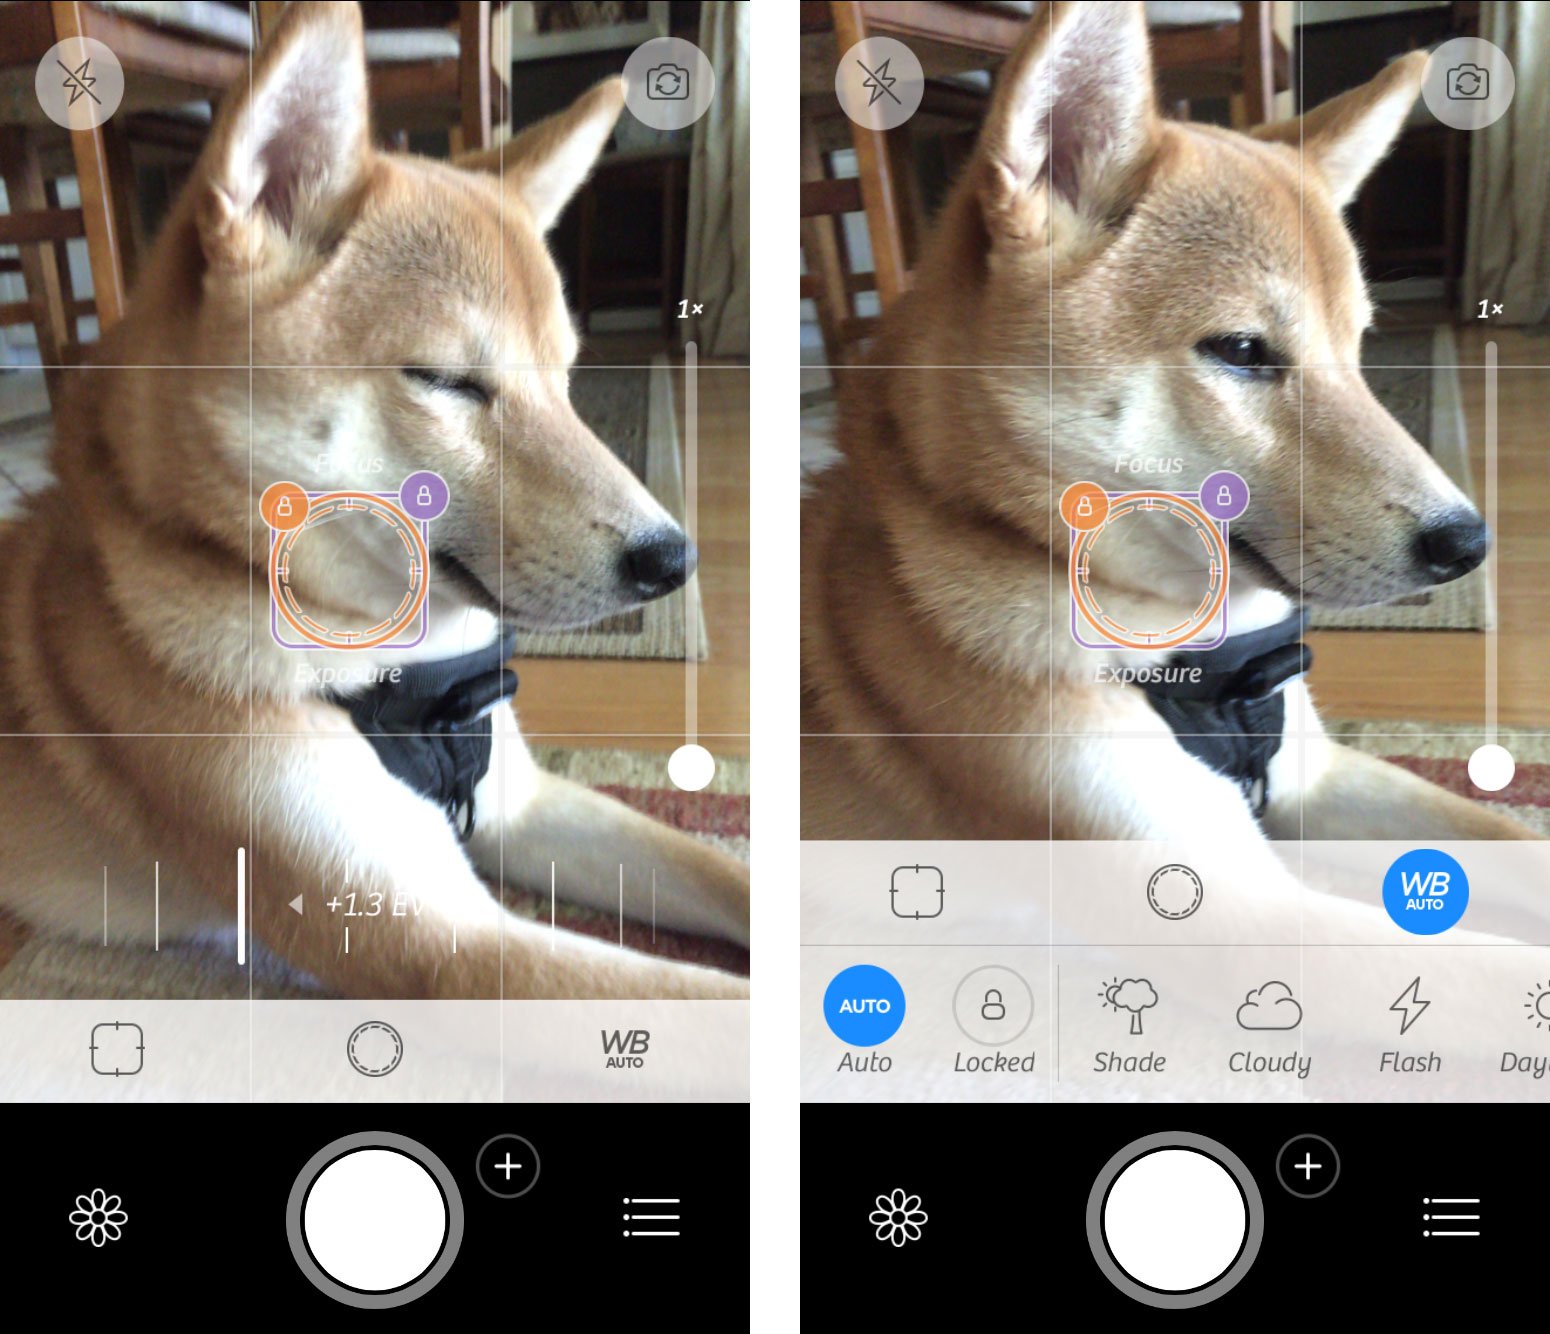 Best camera apps for iPhone: Camera+